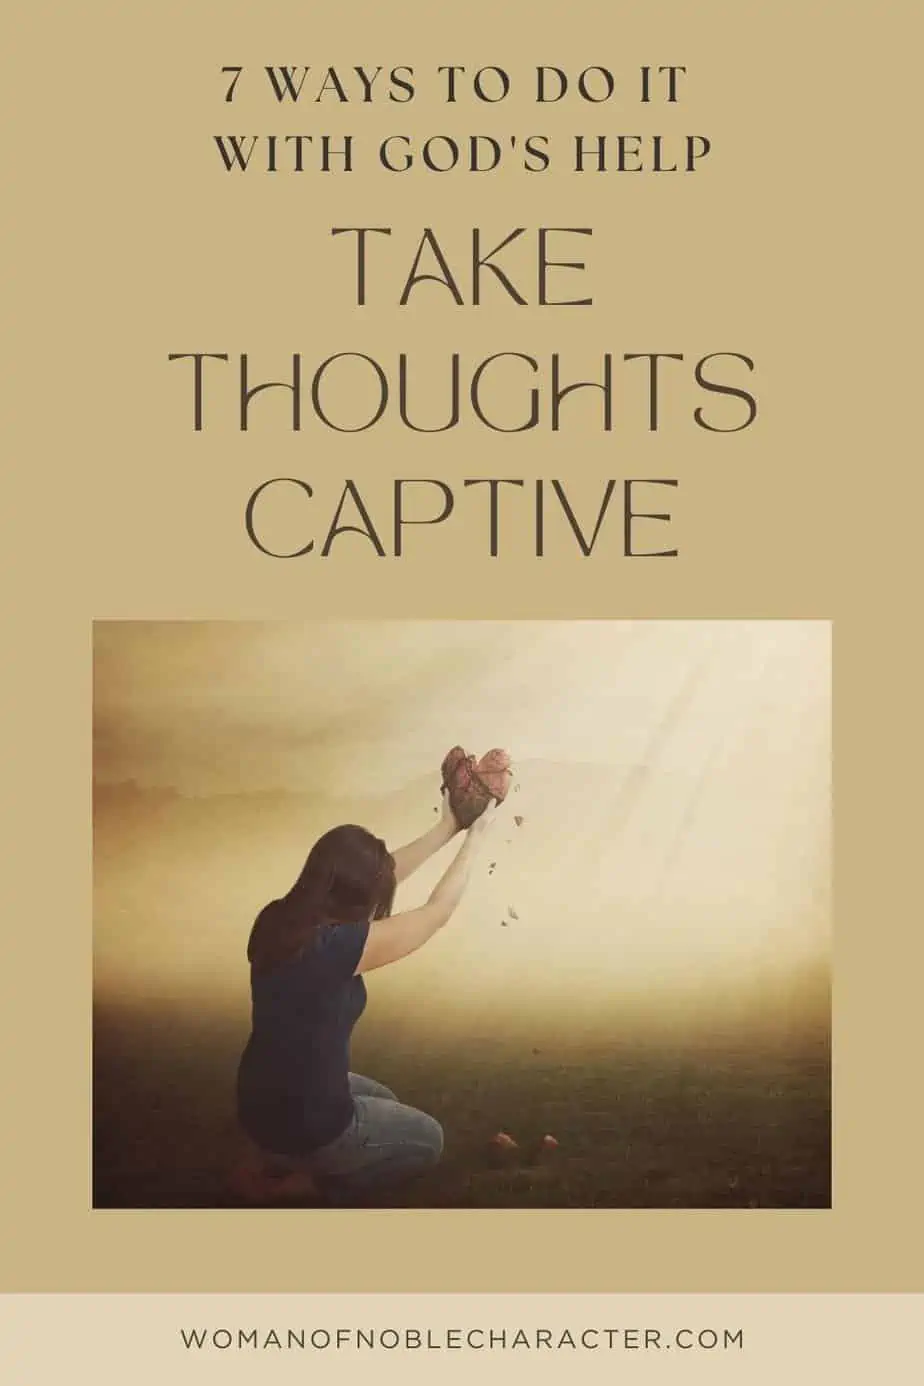 image of woman praying on her knees with text Take Thoughts Captive: 7 Ways to Do it With God's Help